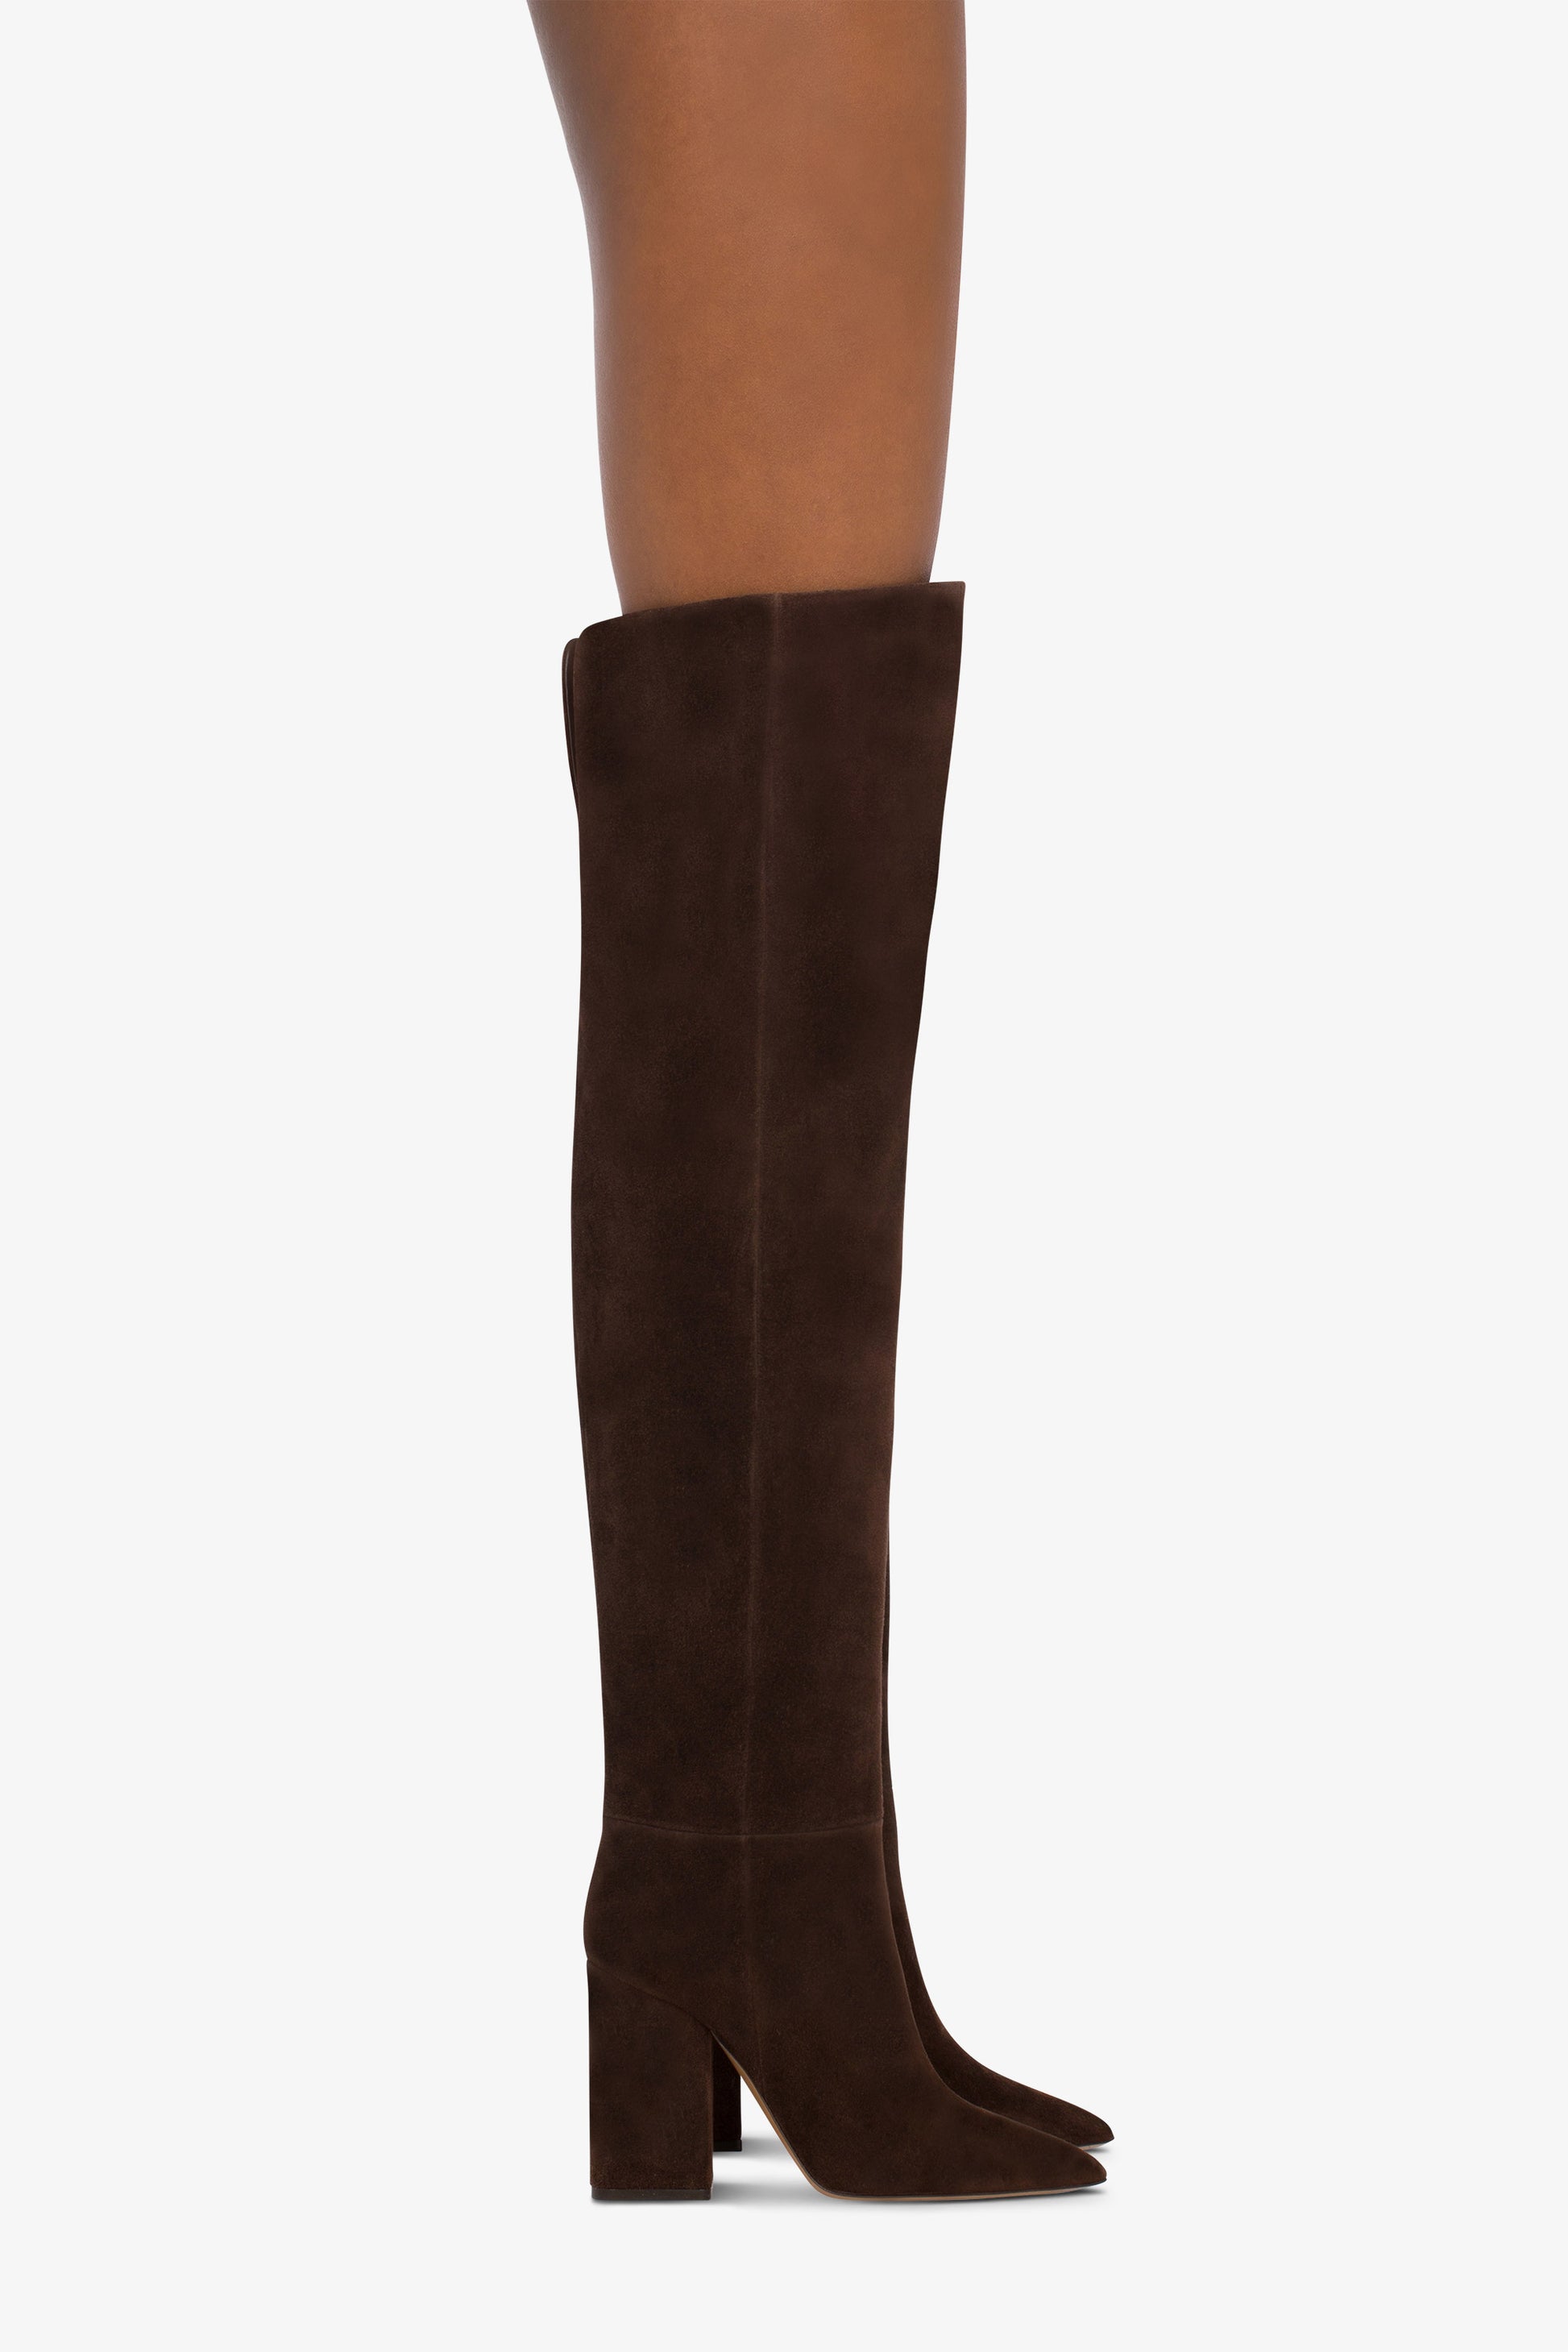 Over-the-knee, long pointed boots in soft pepper suede leather - Product worn